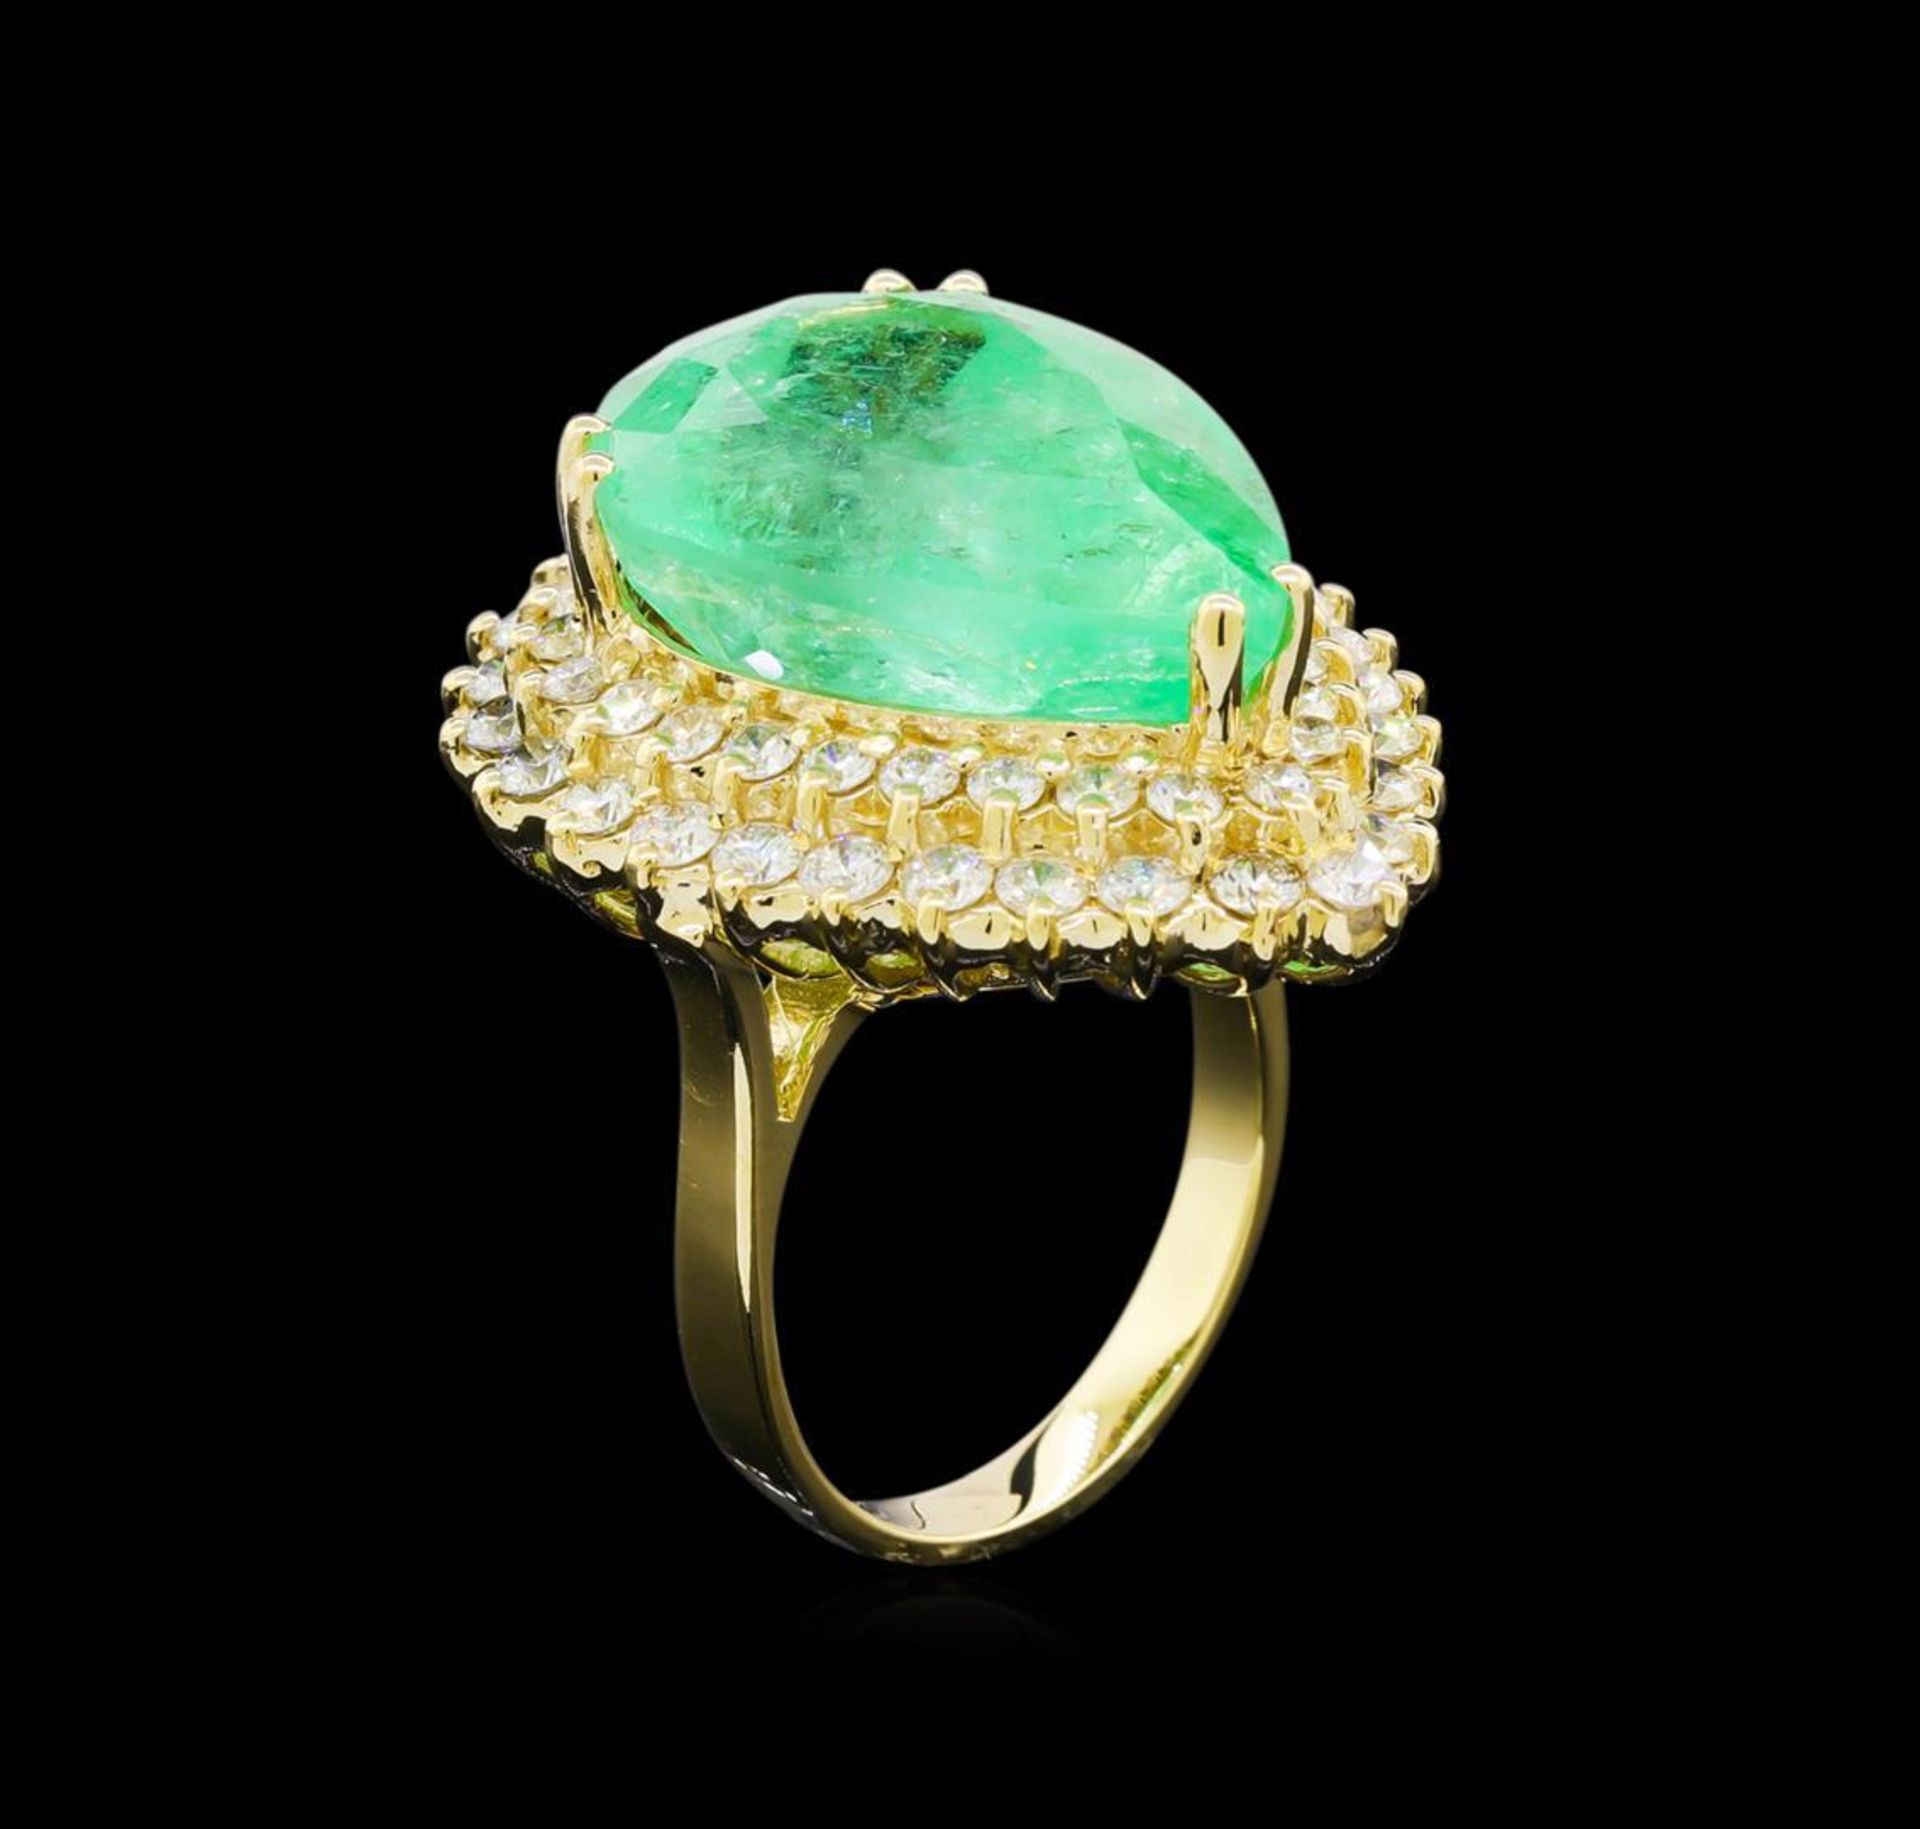 GIA Cert 17.66 ctw Emerald and Diamond Ring - 14KT Yellow Gold - Image 4 of 6